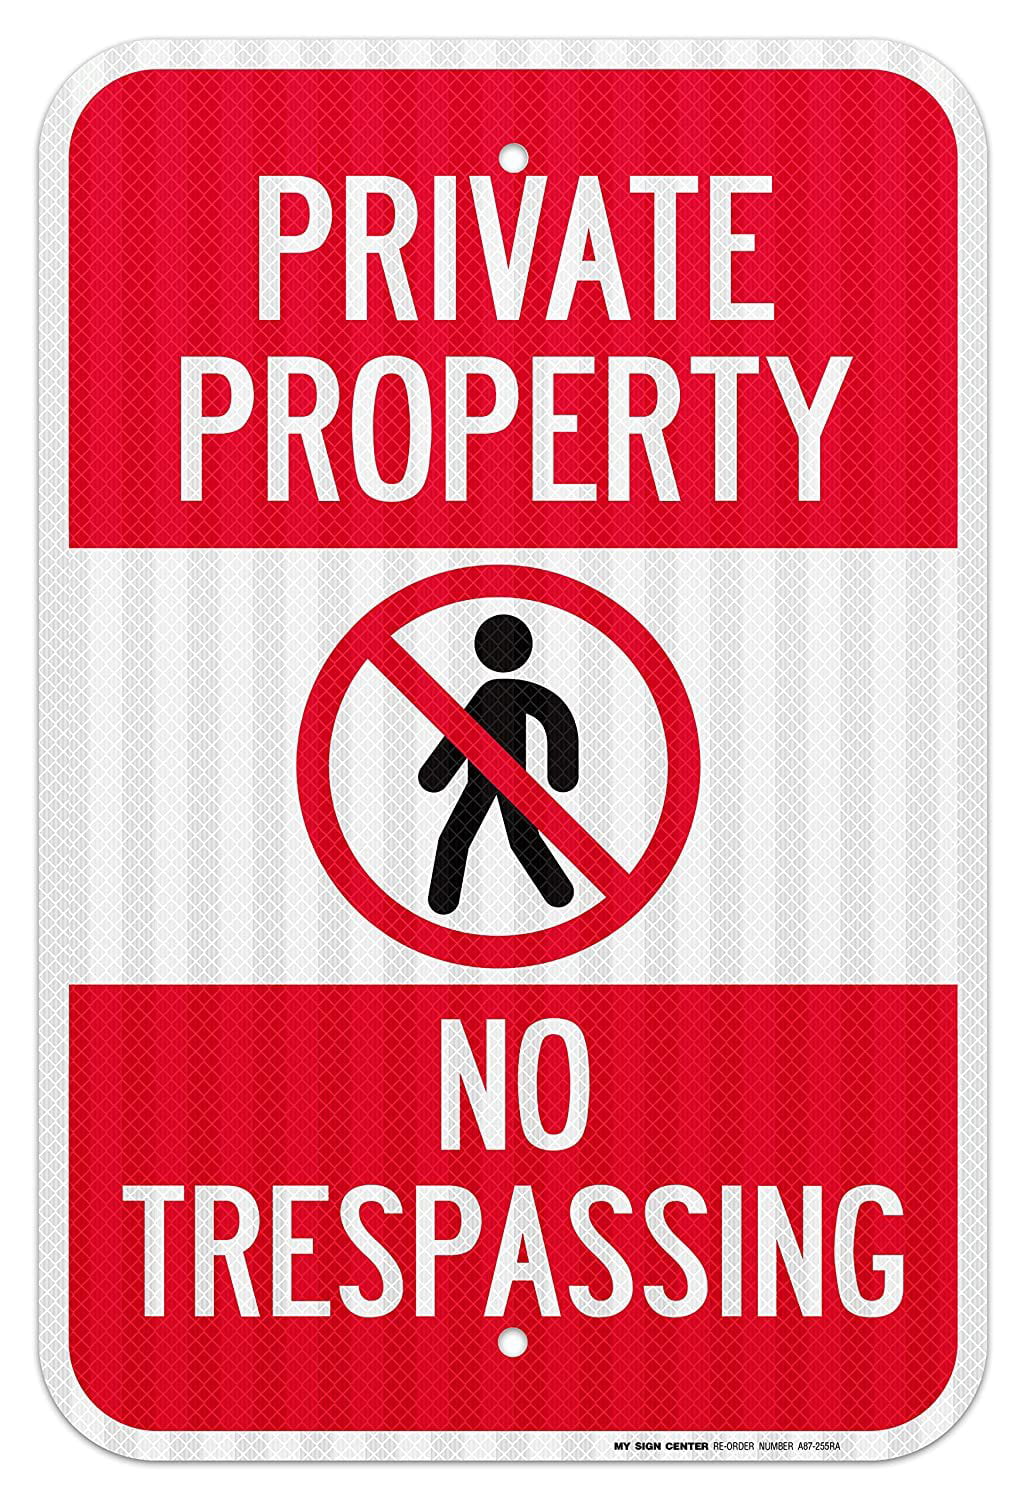 Private Property No Trespassing Warning 8"x12" Aluminum Sign